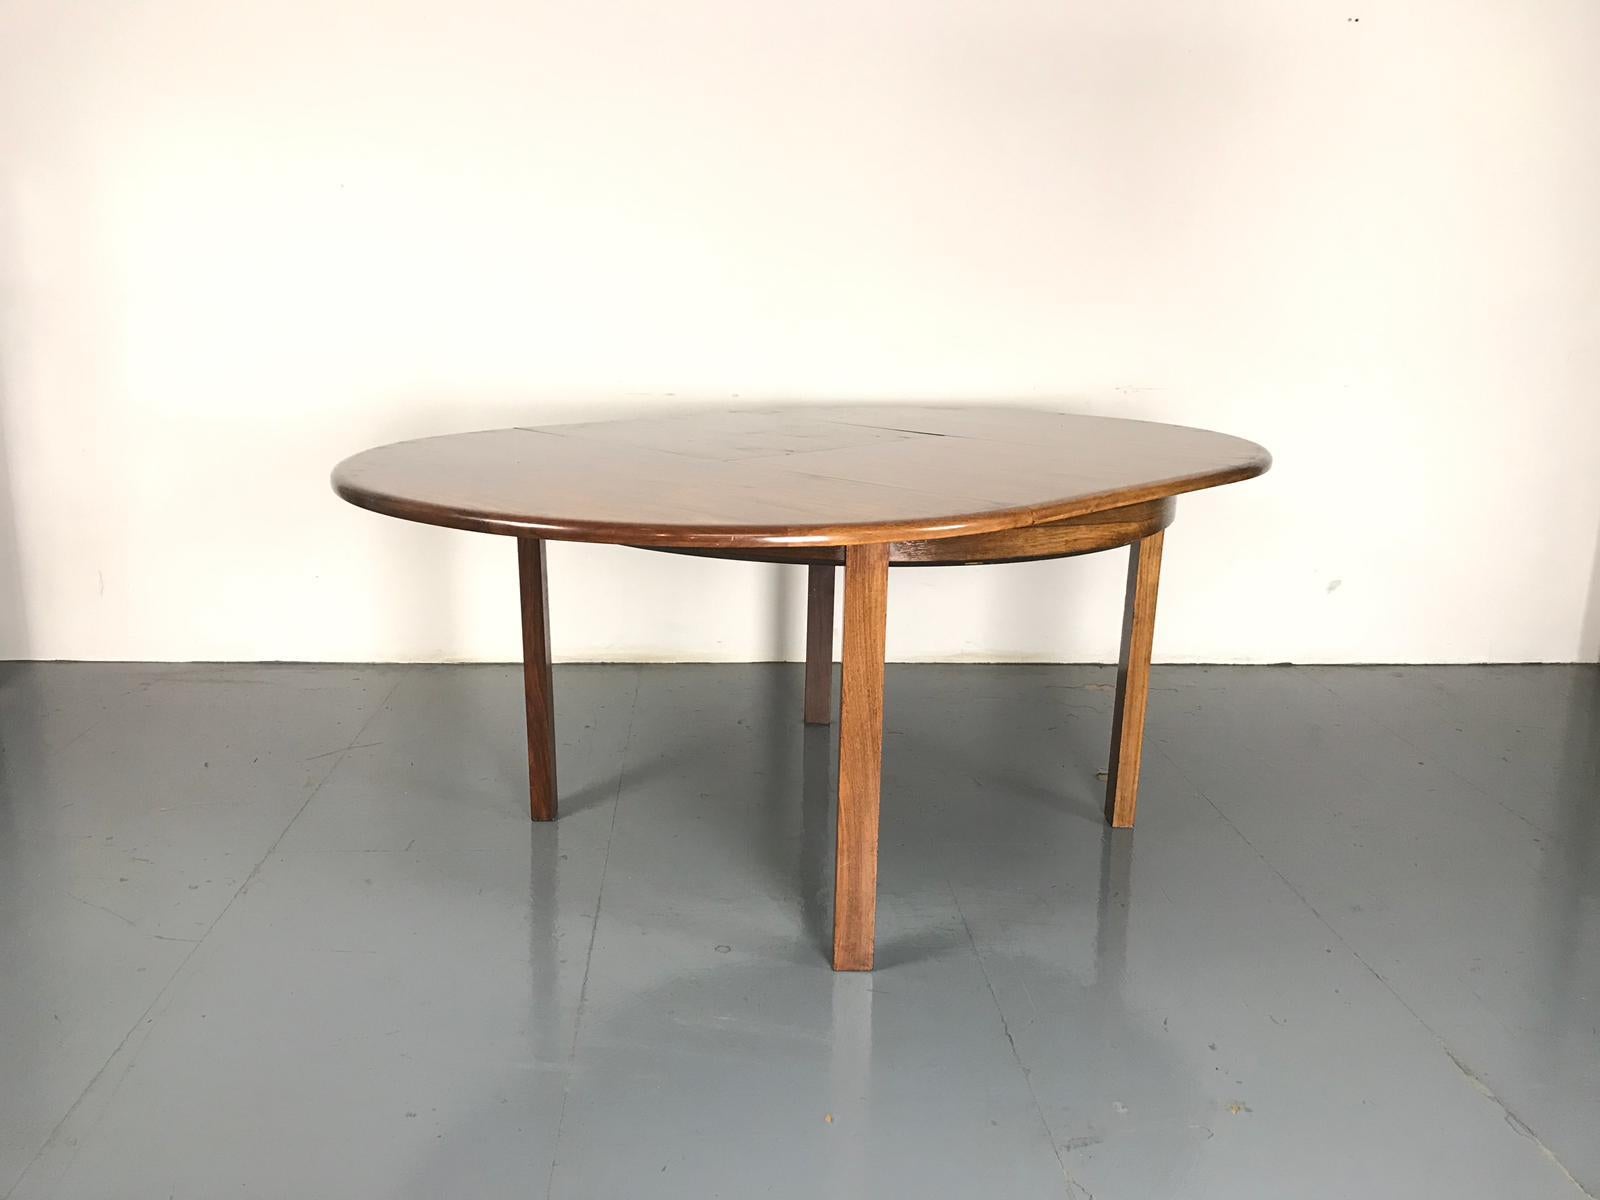 Beautiful midcentury Danish style extending rosewood dining table. 

In good vintage condition. It's a vintage item, so has some general age-related wear, but nothing specific to mention.

Approximate dimensions:

Diameter: 122 cm extending to